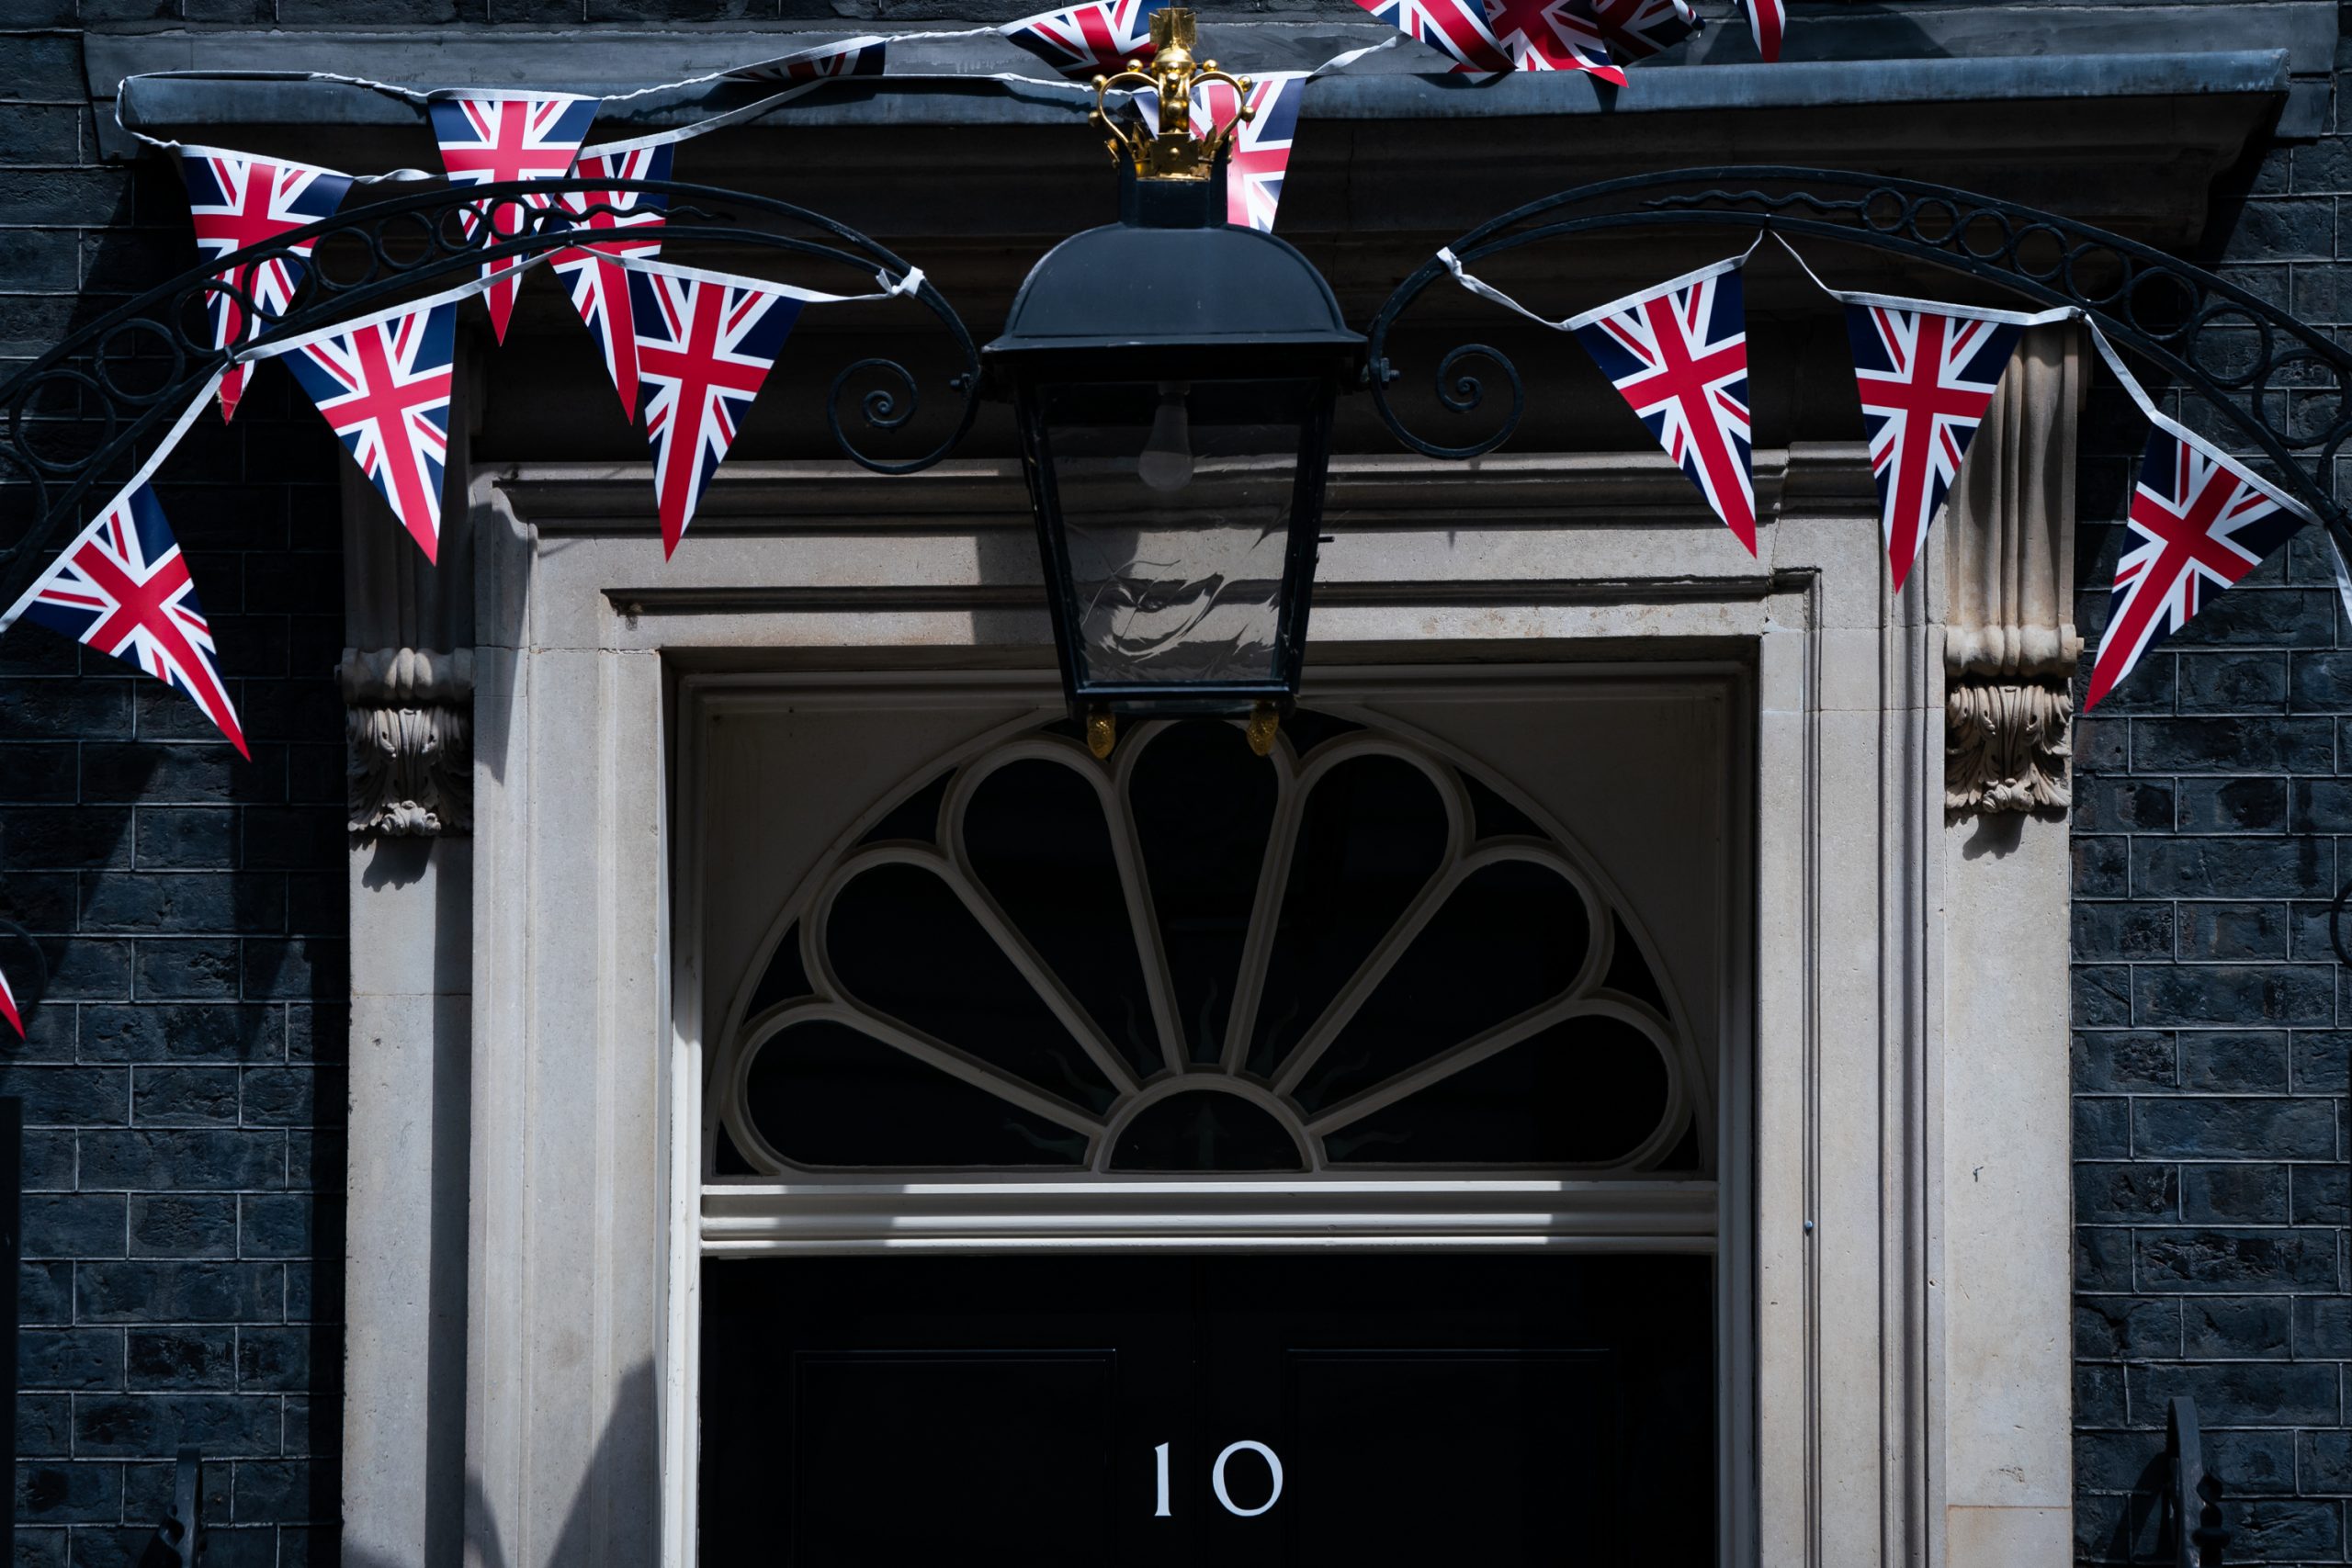 Union flag bunting on the front of No 10 Downing Street